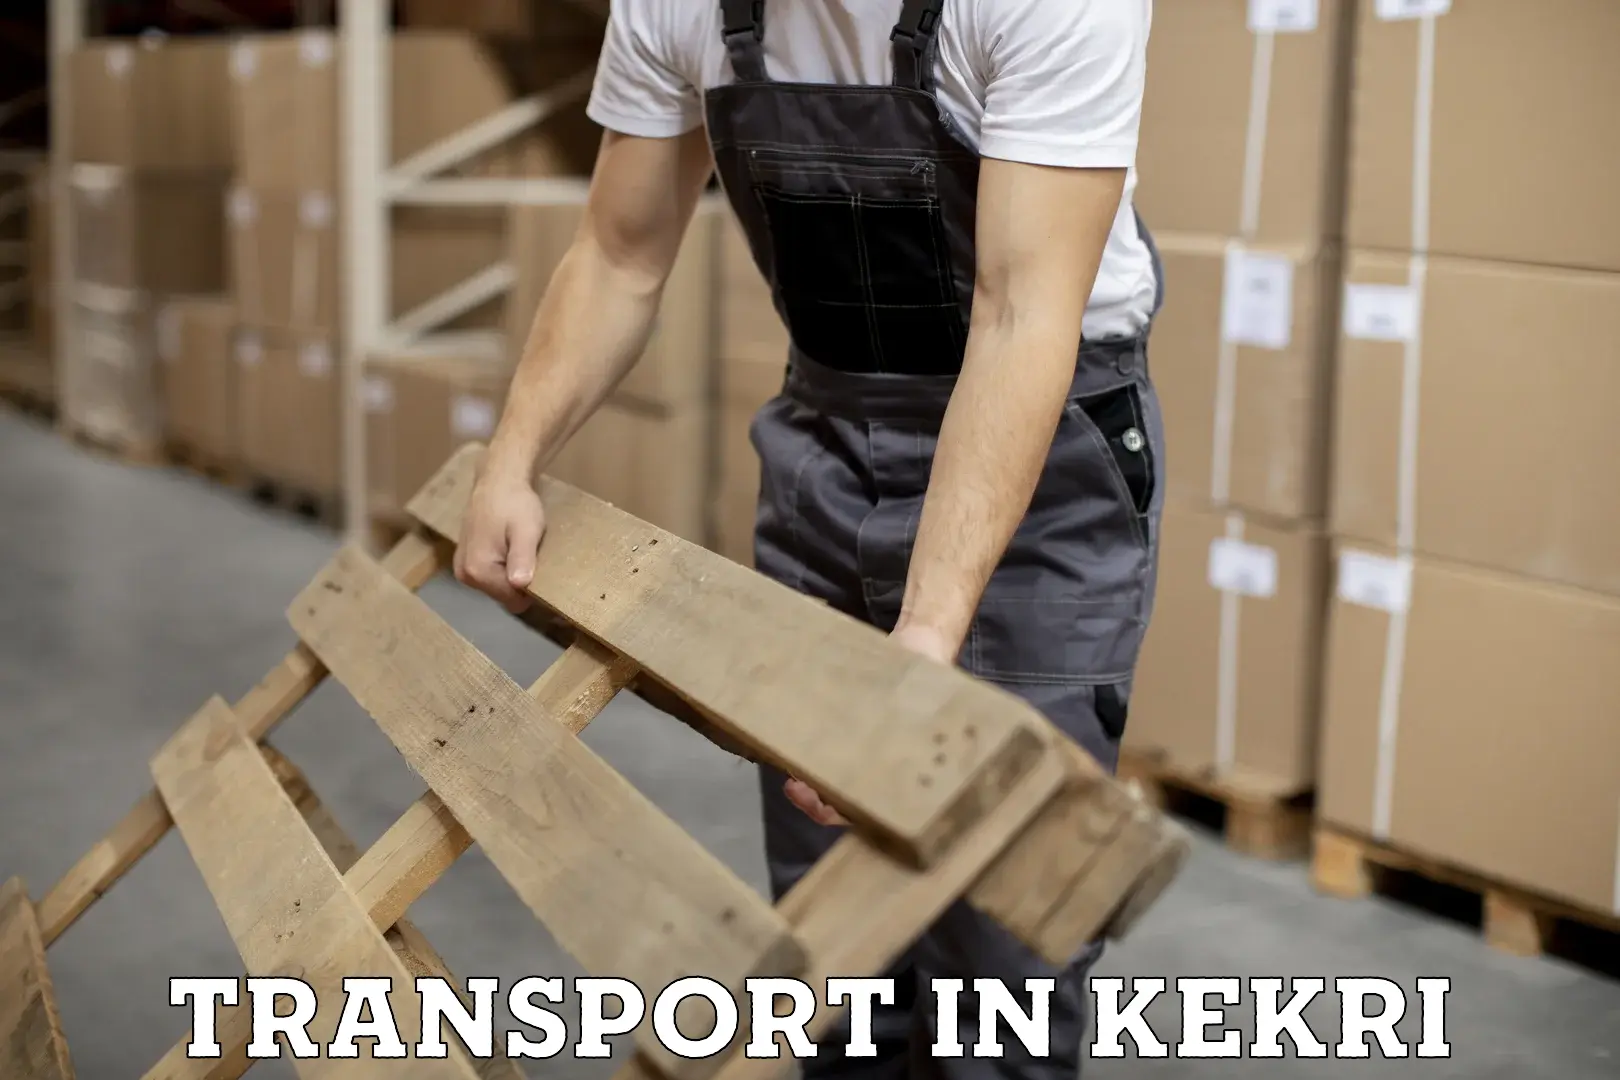 Air cargo transport services in Kekri